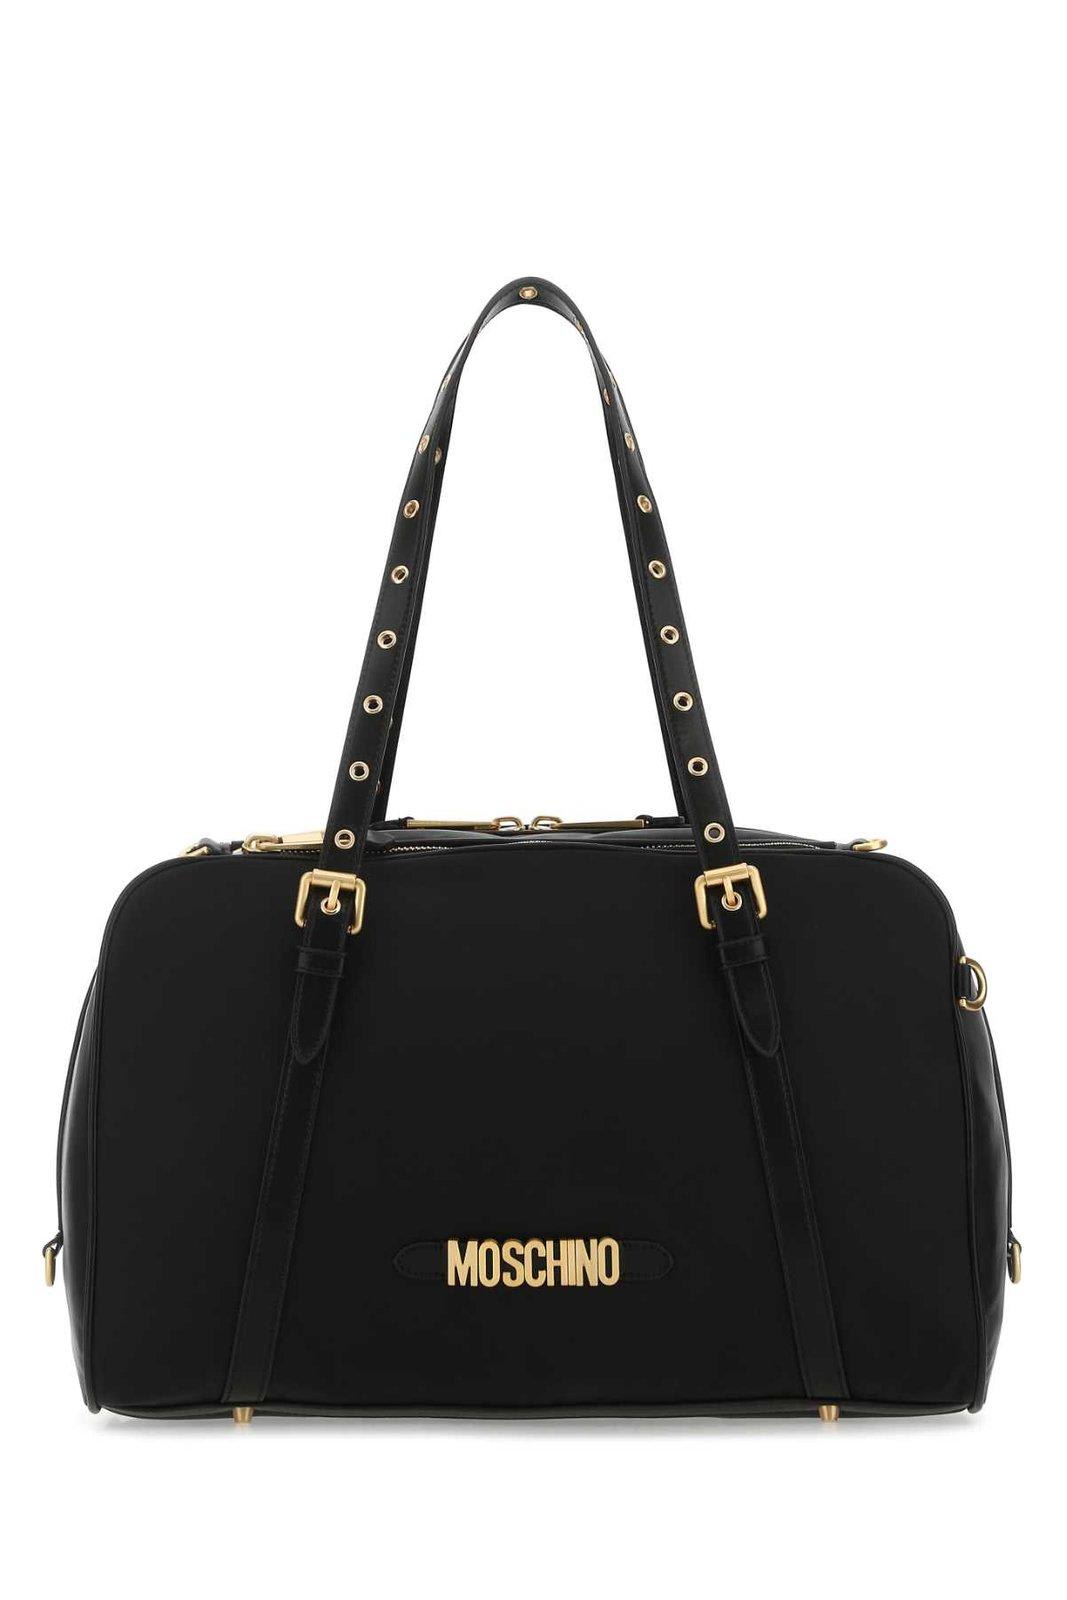 Moschino Logo Lettering Zipped Tote Bag